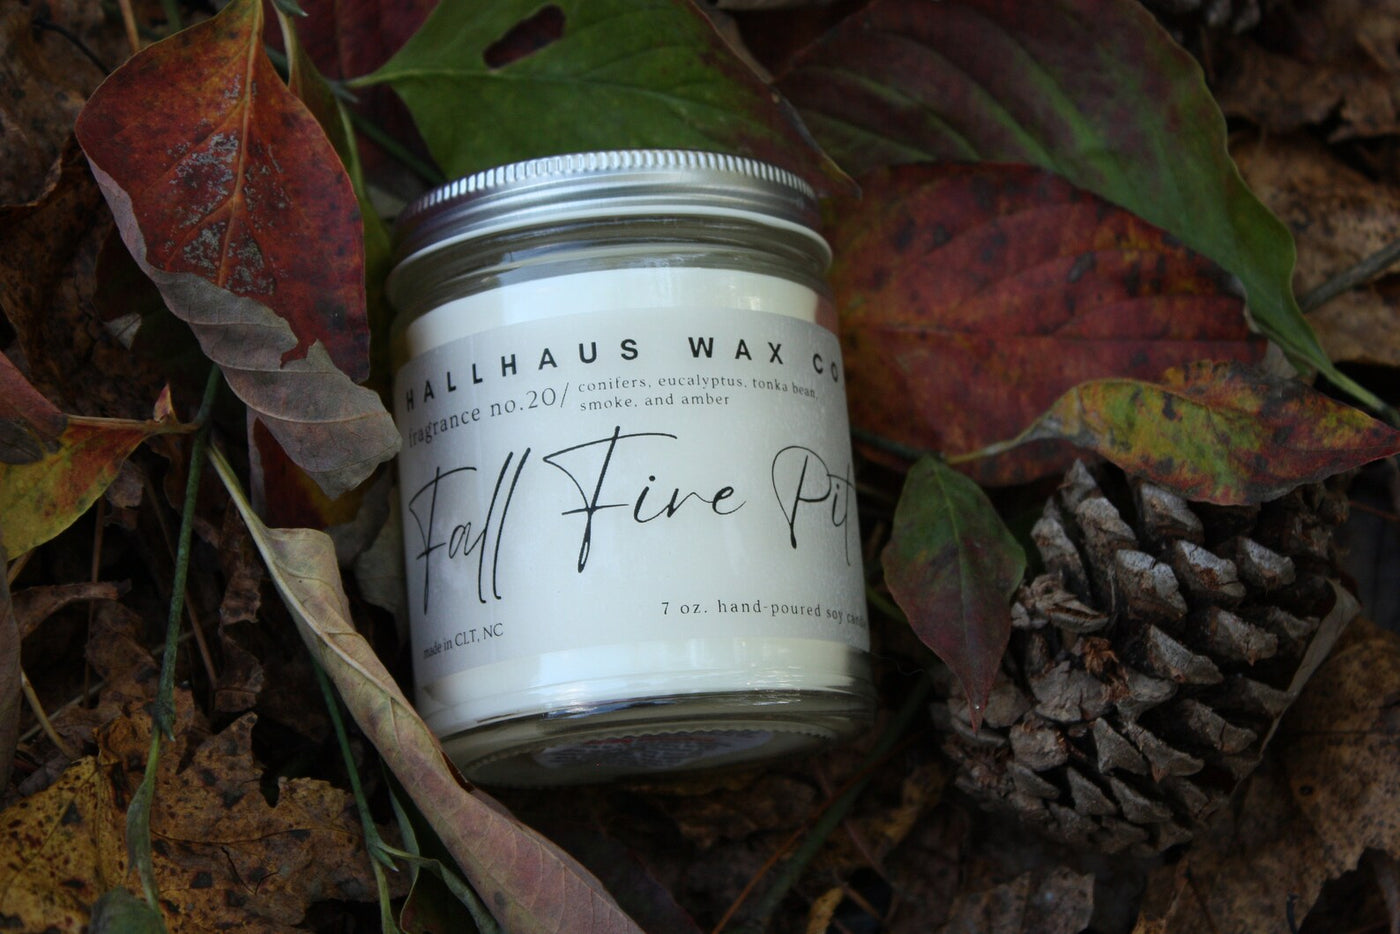 Hallhaus Wax Co No. 20 Jar Candle in Fall Fire Pit